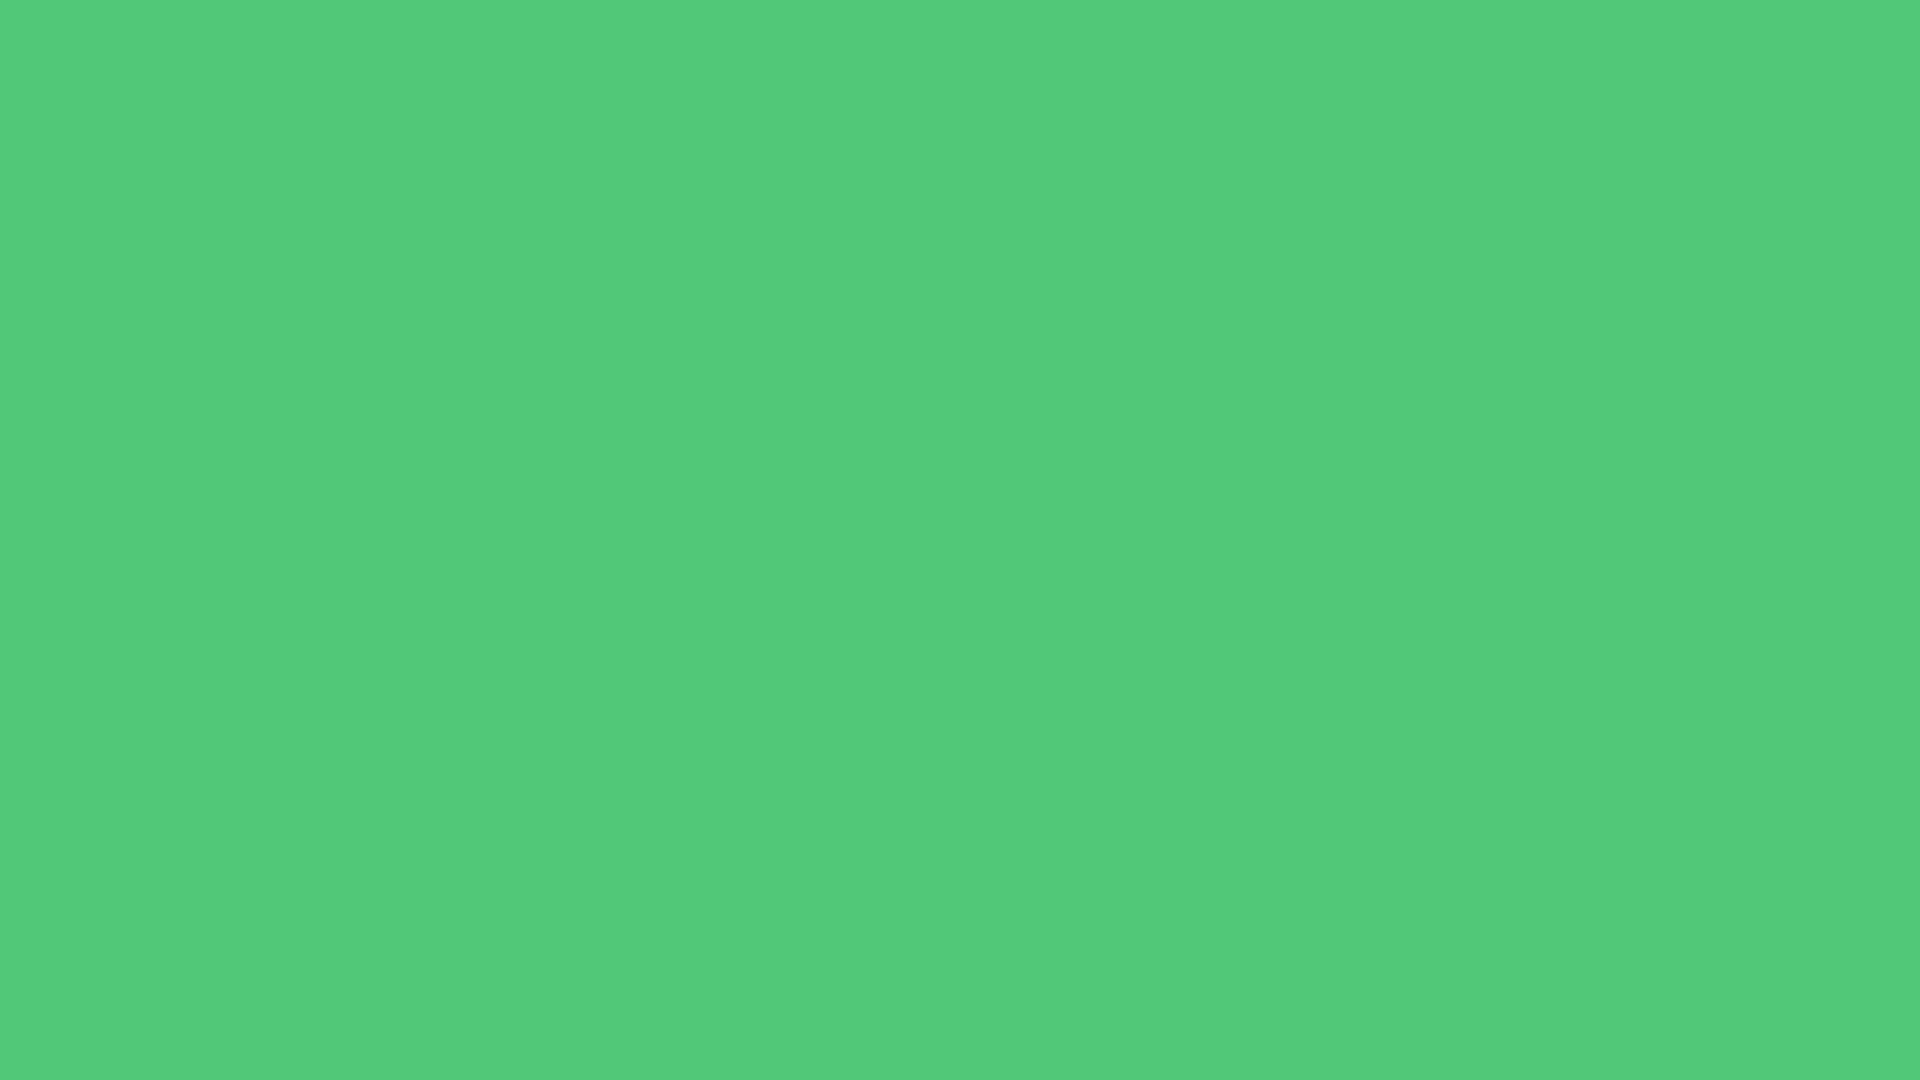 1920x1080-paris-green-solid-color-background.jpg